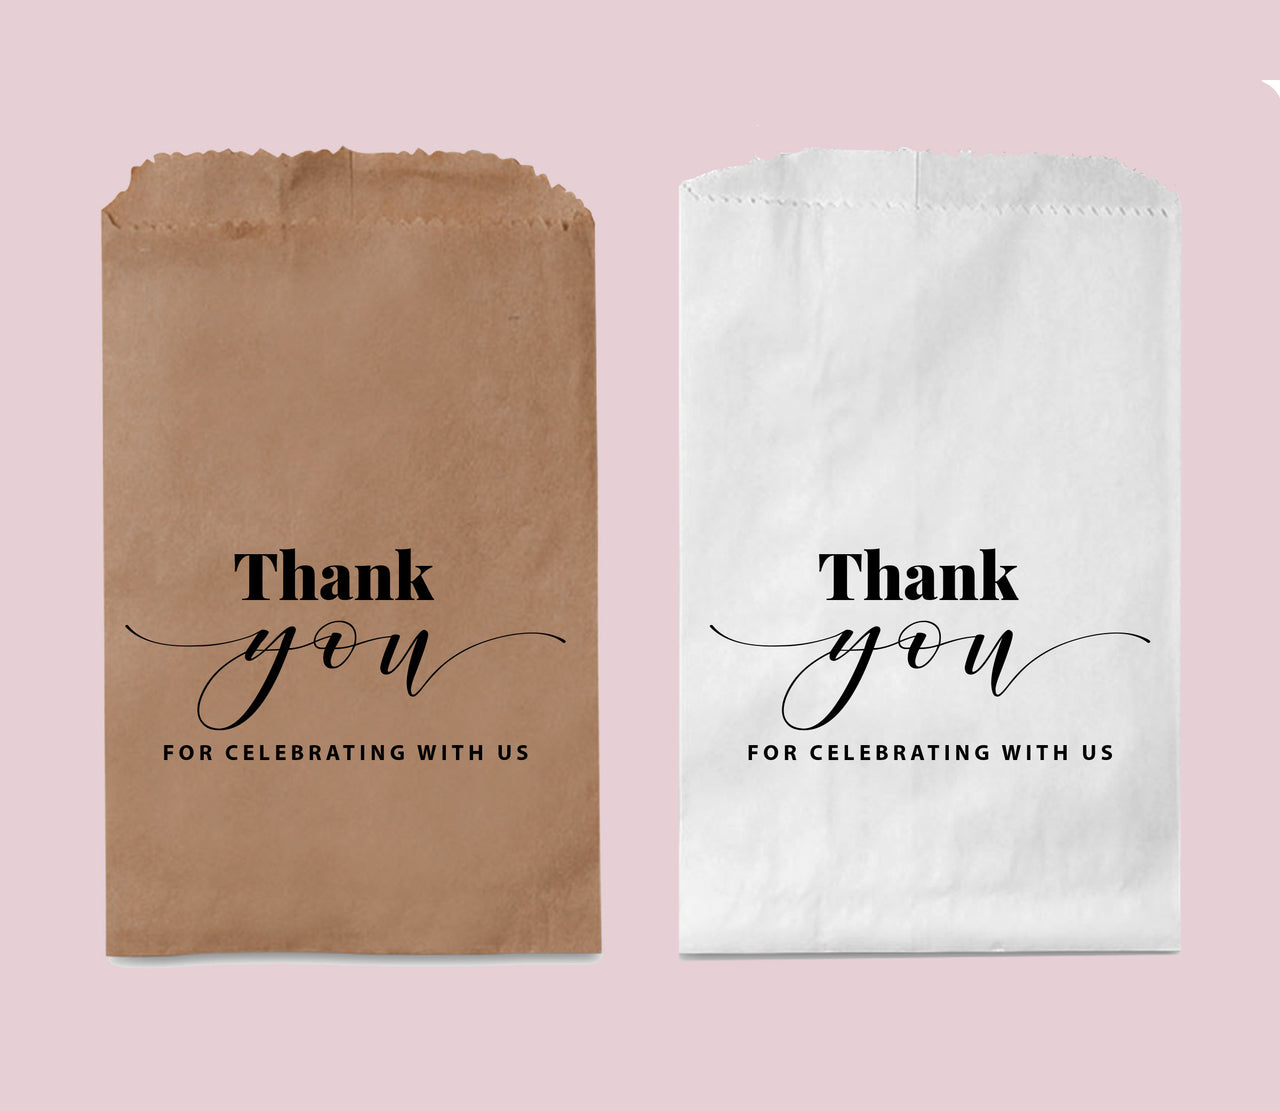 Wedding Favor Bags, Personalized Thank You Paper Bags, Treat Bag, Candy Bar Bag, Goodie Bags